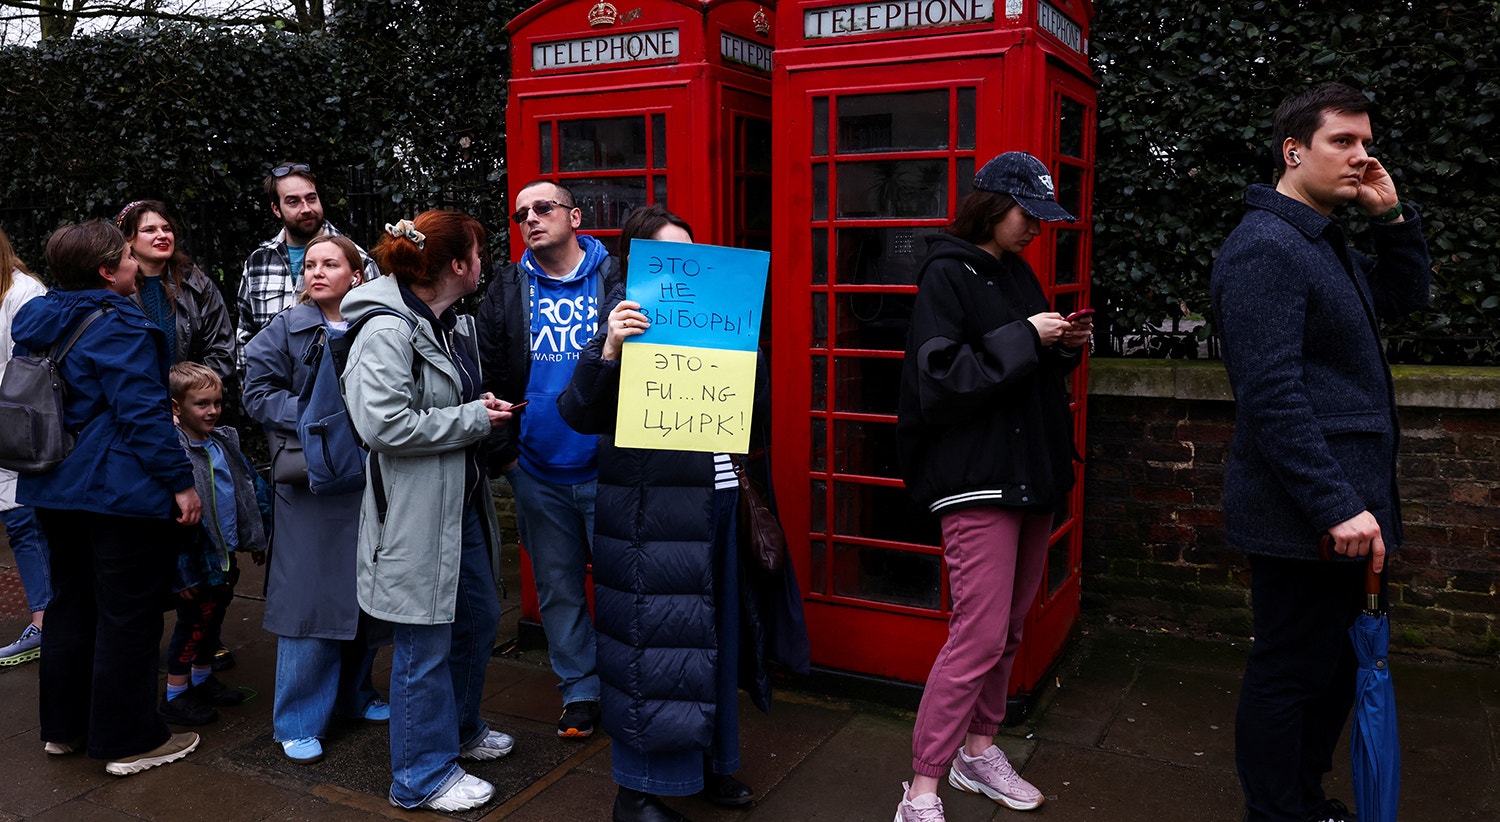  Londres - Reino Unido | Foto: Kevin Coombs - Reuters 